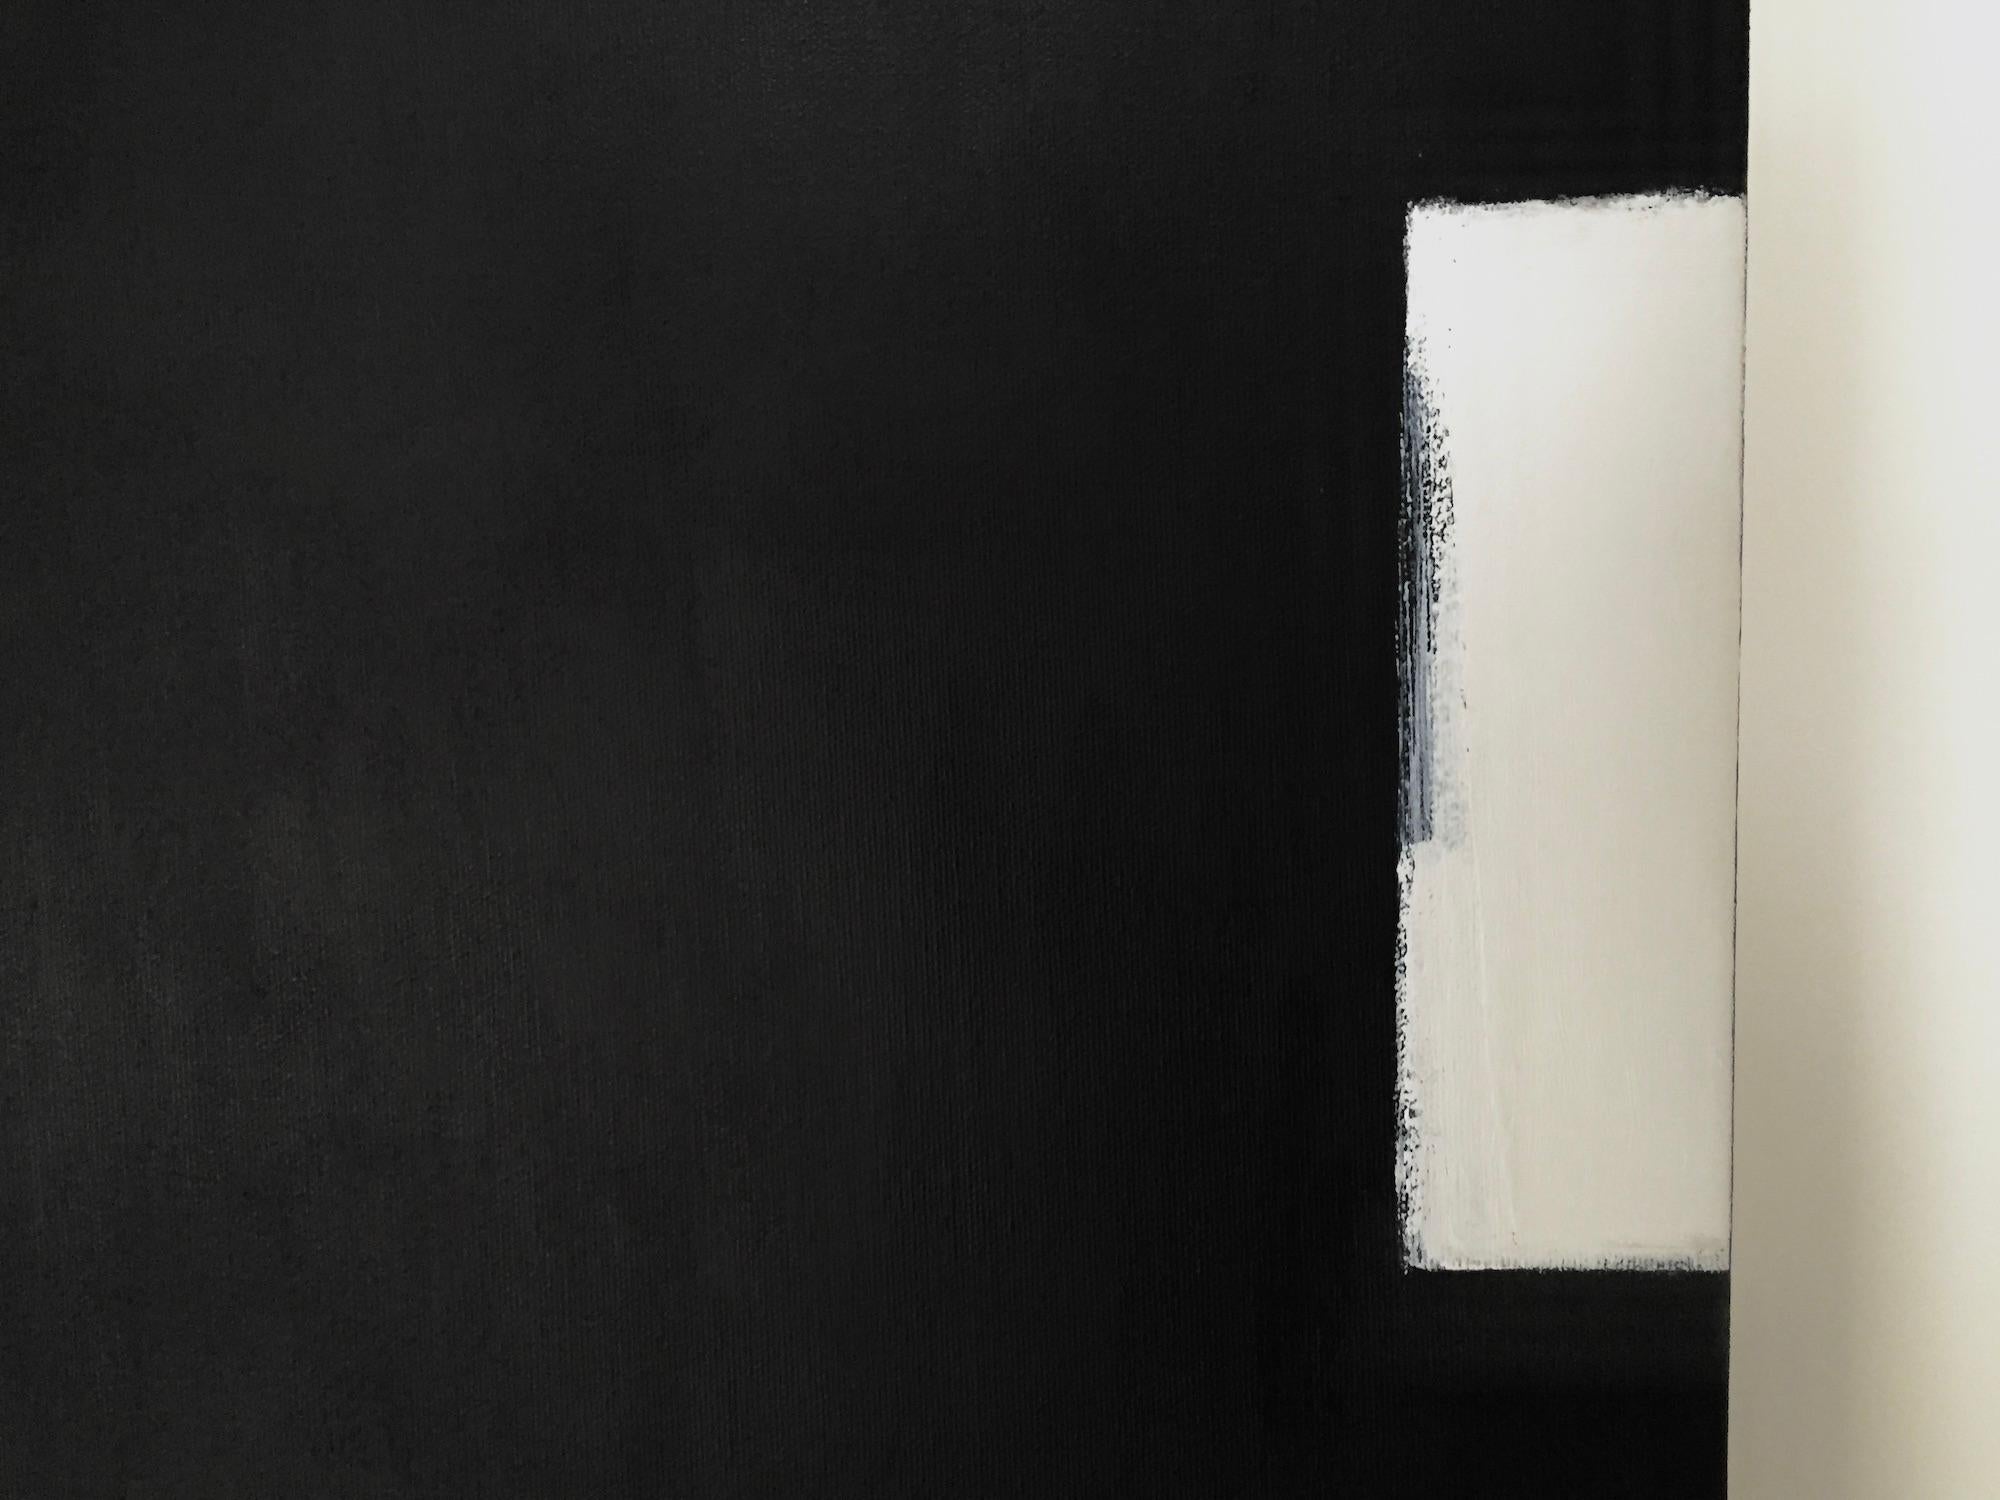 Contemporary abstract painting. The black and white palette and minimal composition puts emphasis on the power of simplicity and restraint. The aesthetically calm painting invites the viewer to experience an immediate, purely visual response. 

To